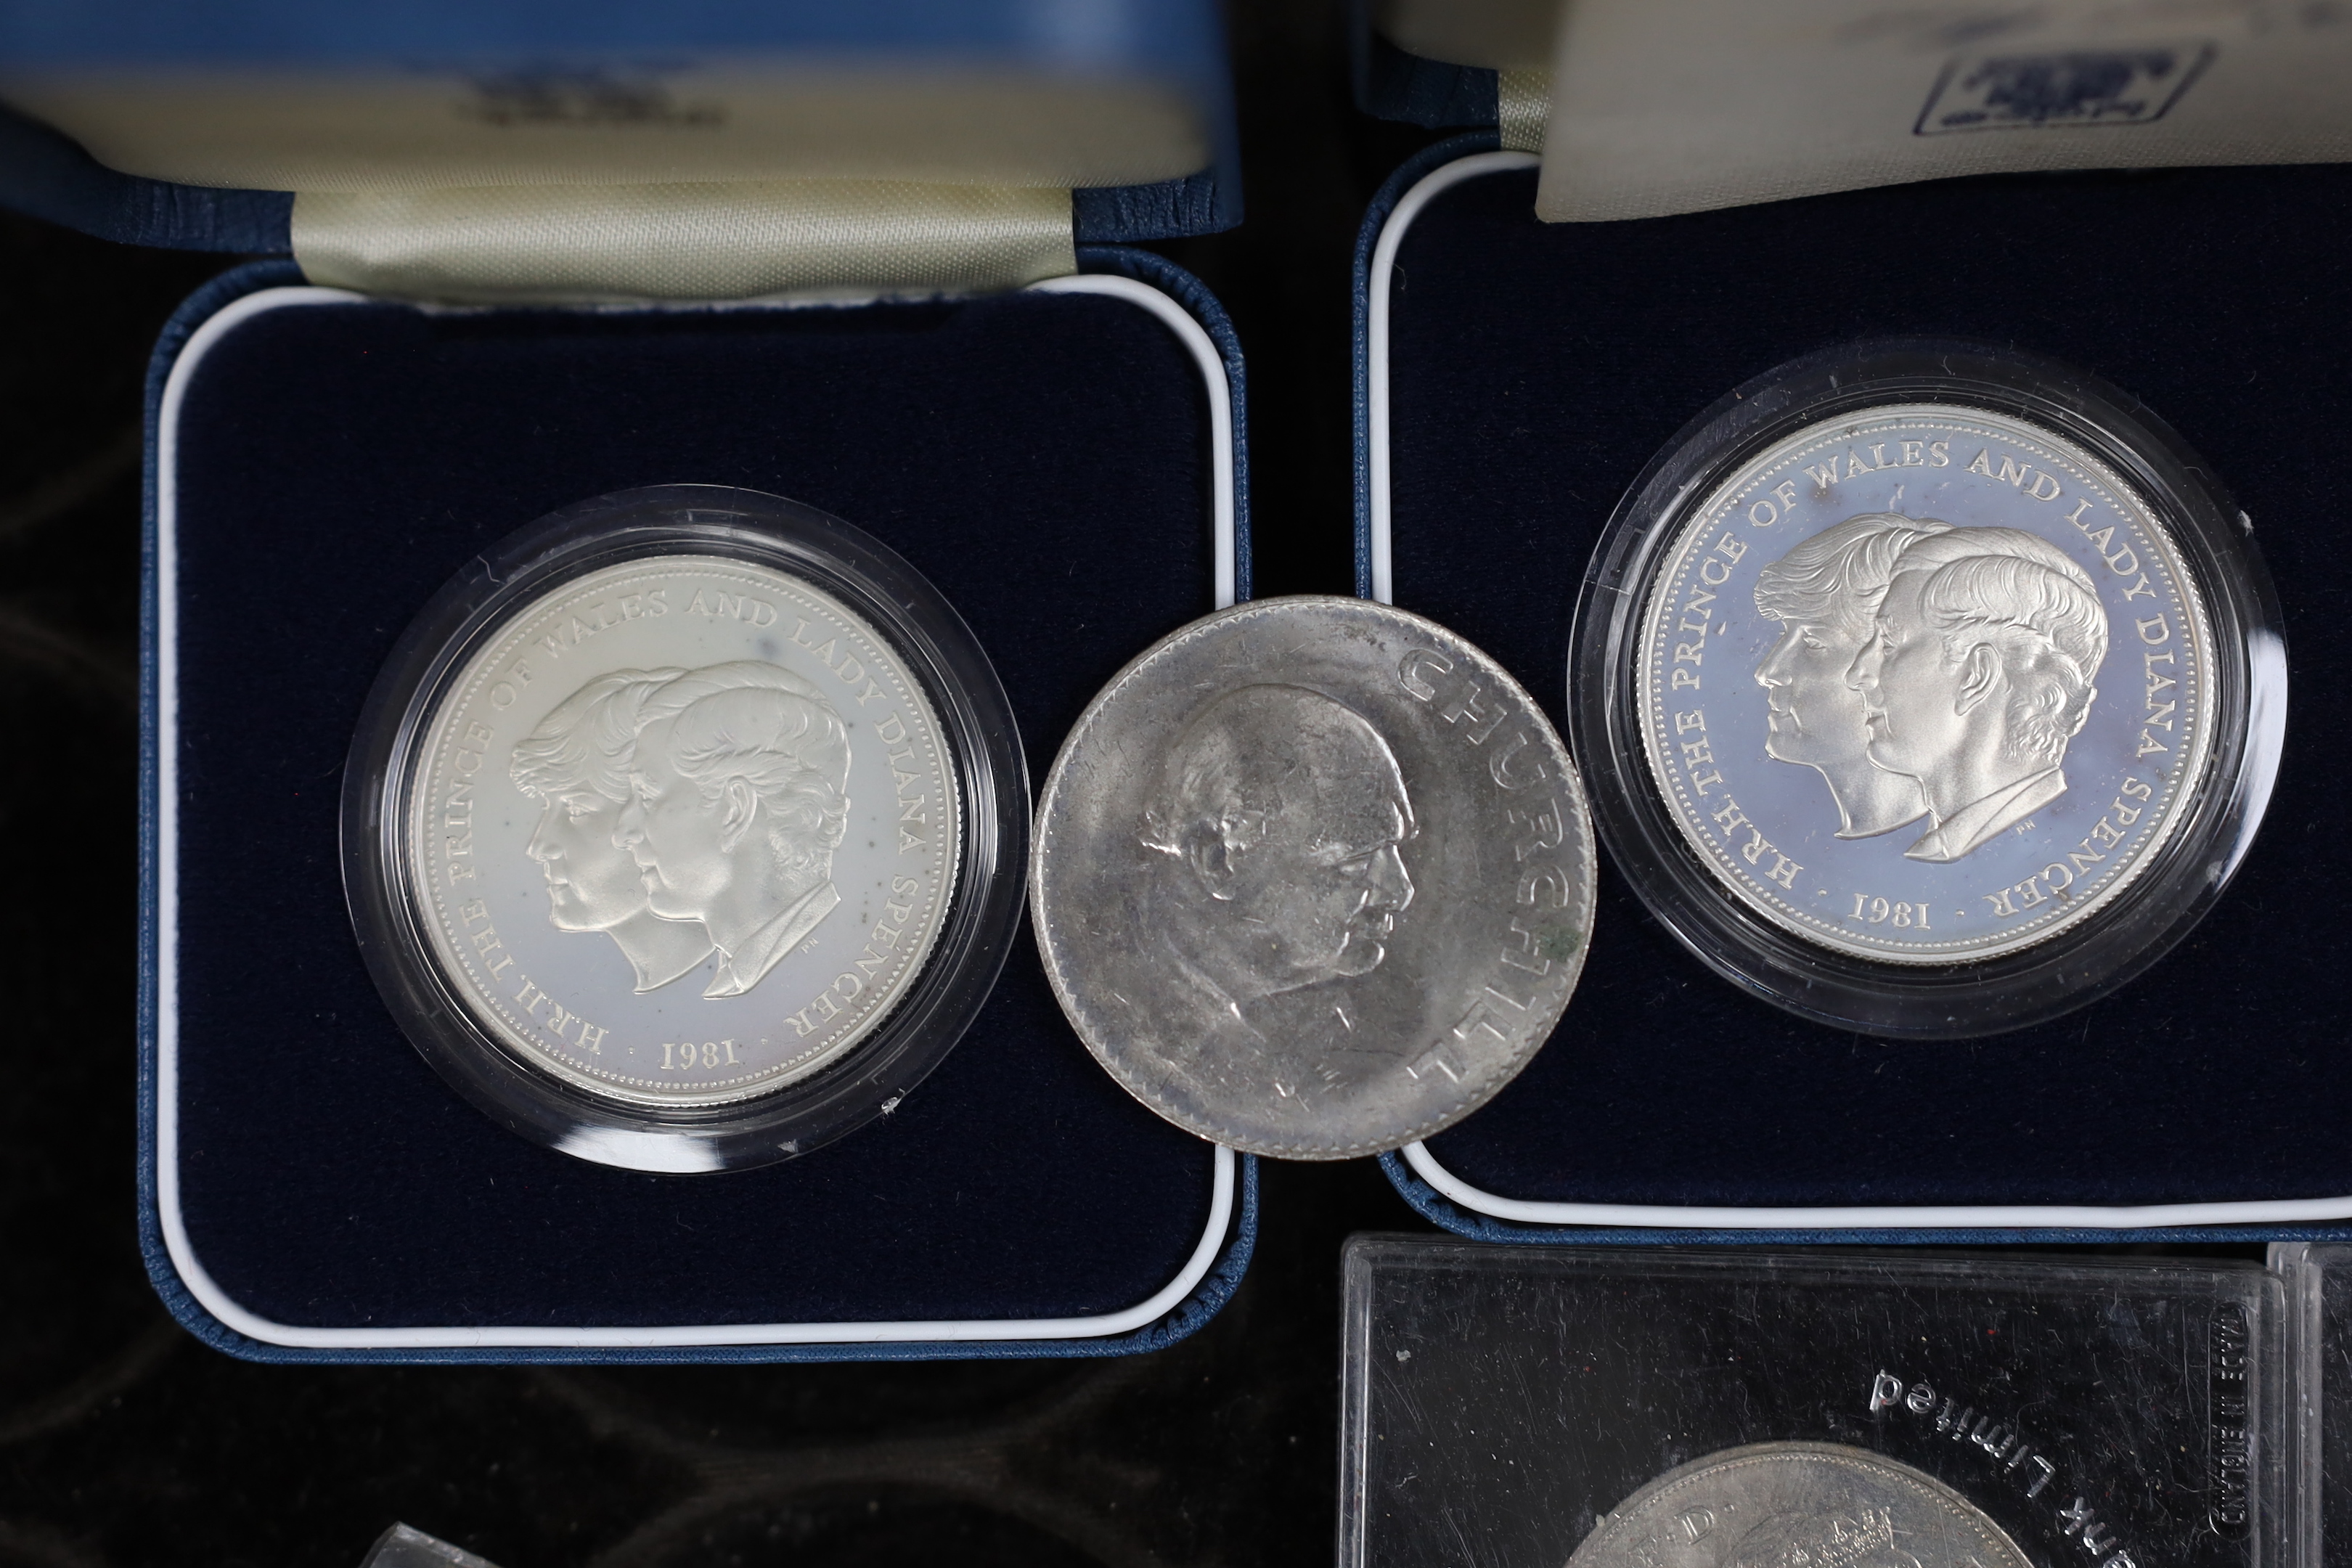 British coins, Royal Mint, QEII, two cased silver proof coins commemorating the marriage HRH Prince of Wales and Lady Diana Spencer 1981 and six other commemorative crowns